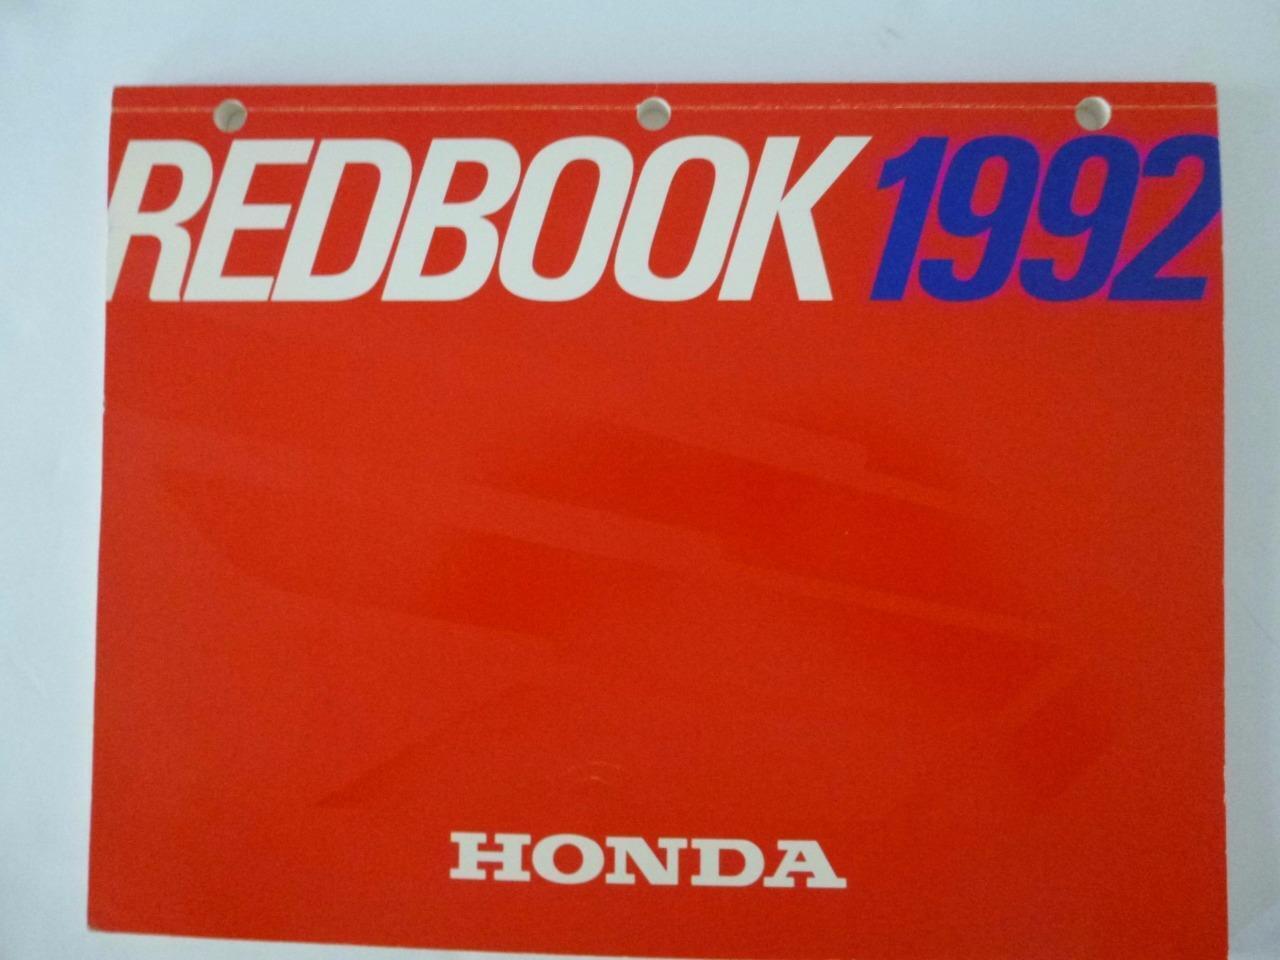 Honda Motors Division Redbook 1992 distributed dealers only Red book color pages